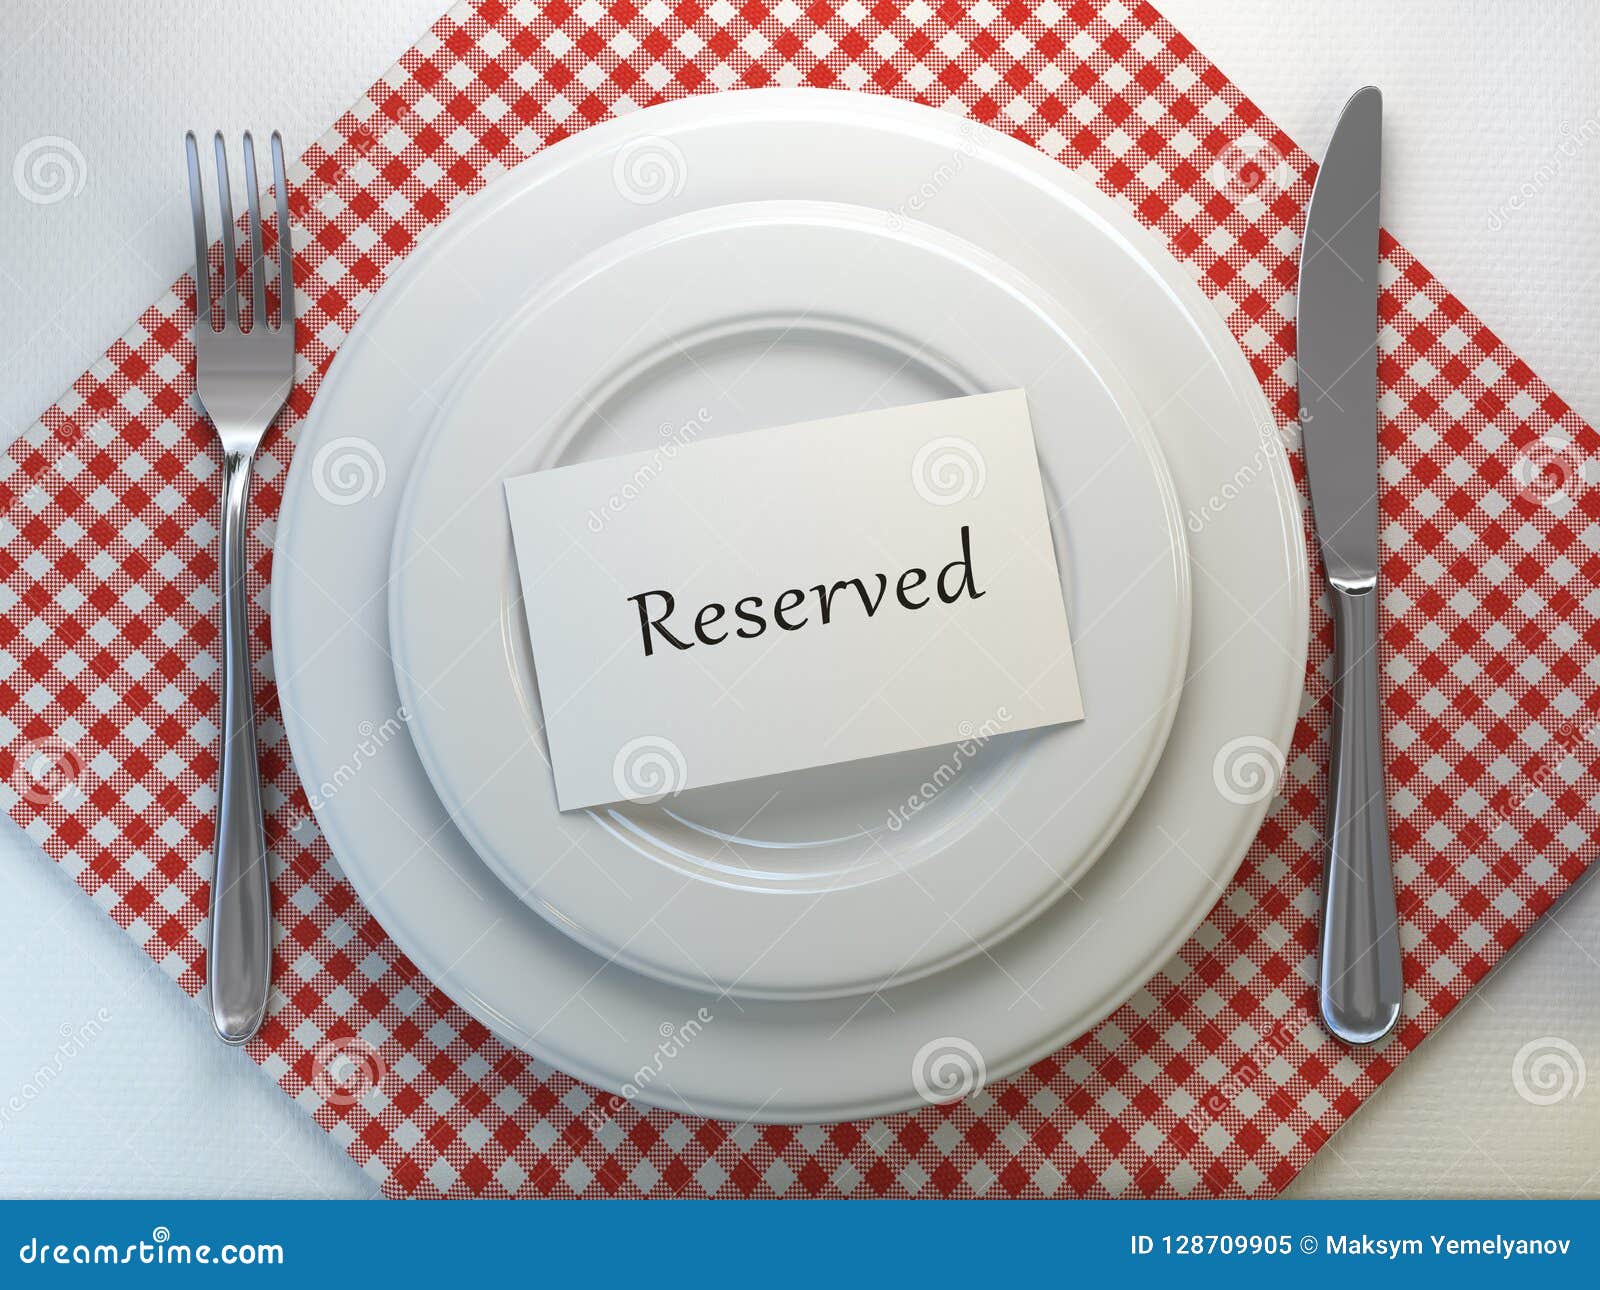 reserved card on a restaurant table setting. top view. mock up.